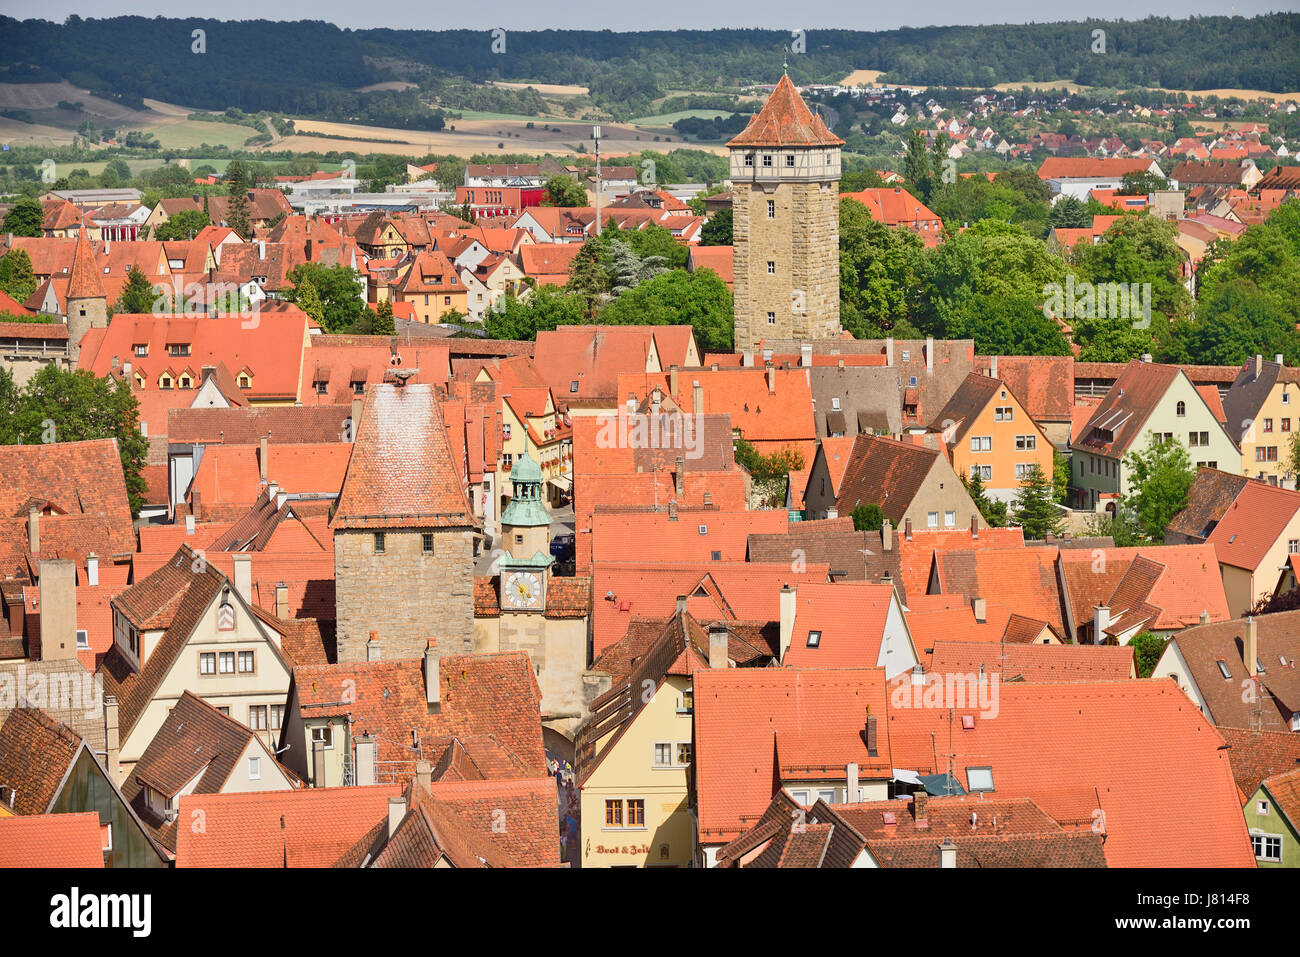 Germany, Bavaria, Rothenburg ob der Tauber, Marks Tower and Roeder Arch from Town Hall Tower with Roeder Gate in the background. Stock Photo